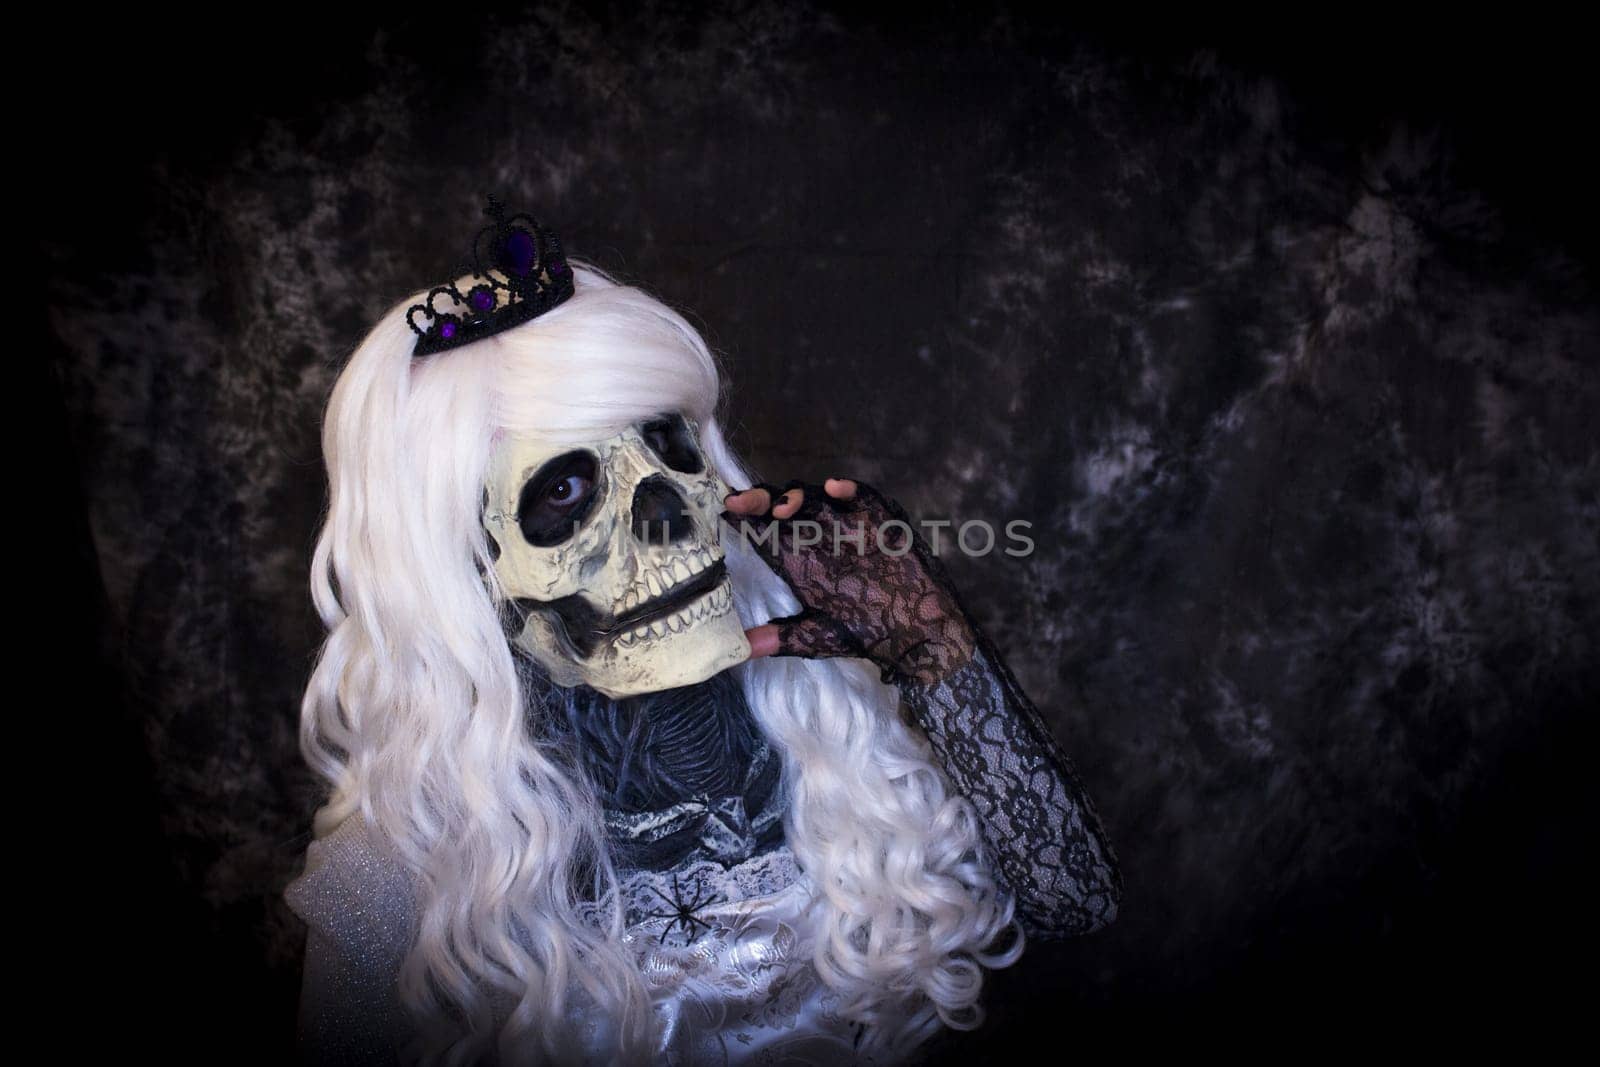 Woman dressed as dead halloween. One person.